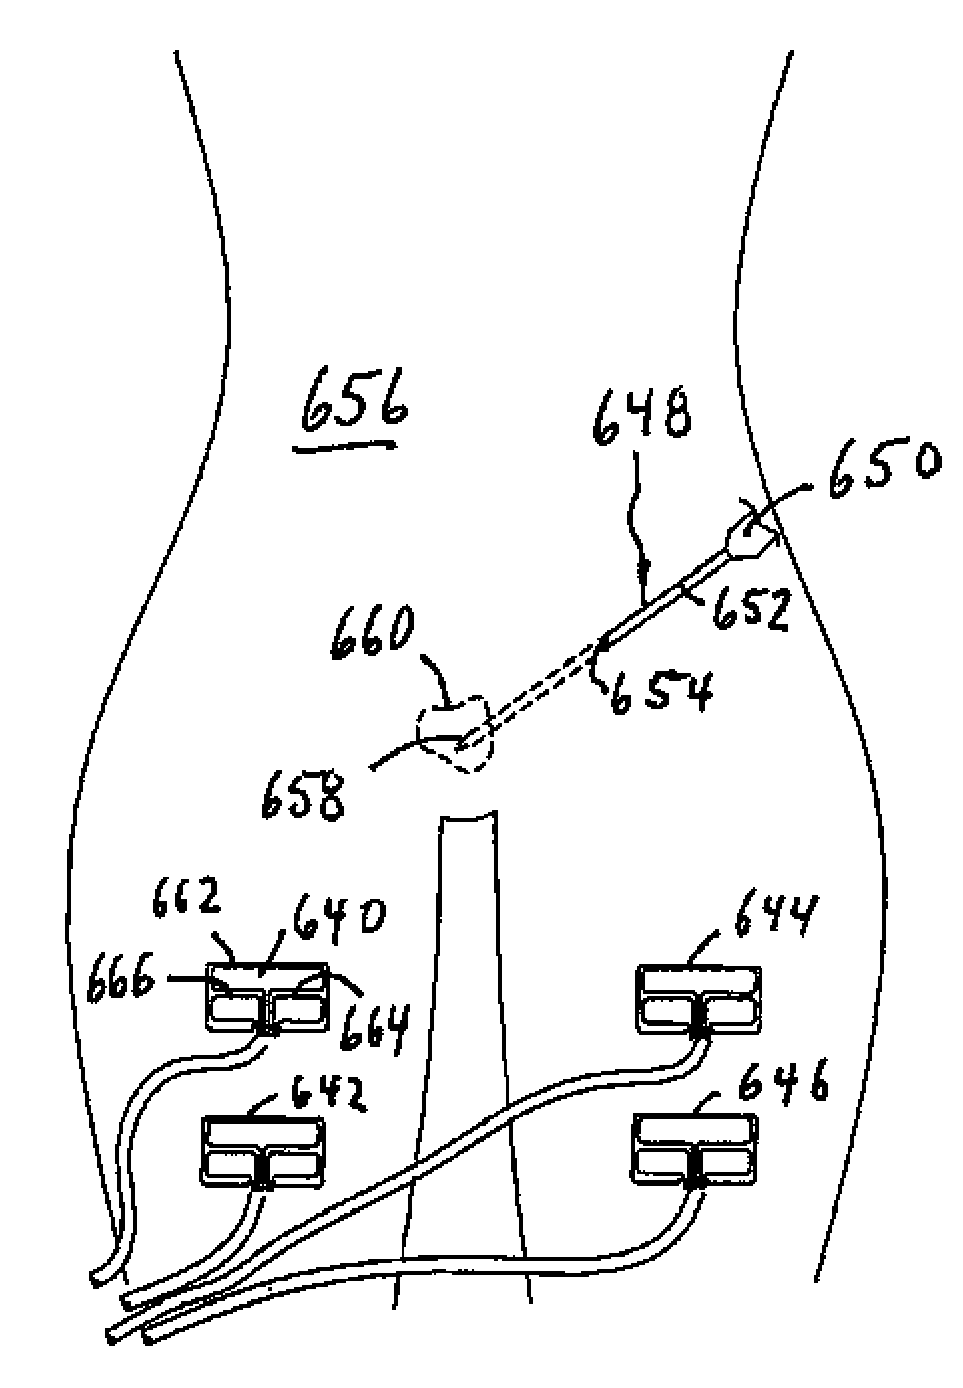 Impedance responsive ablation RF driving for moderating return electrode temperature